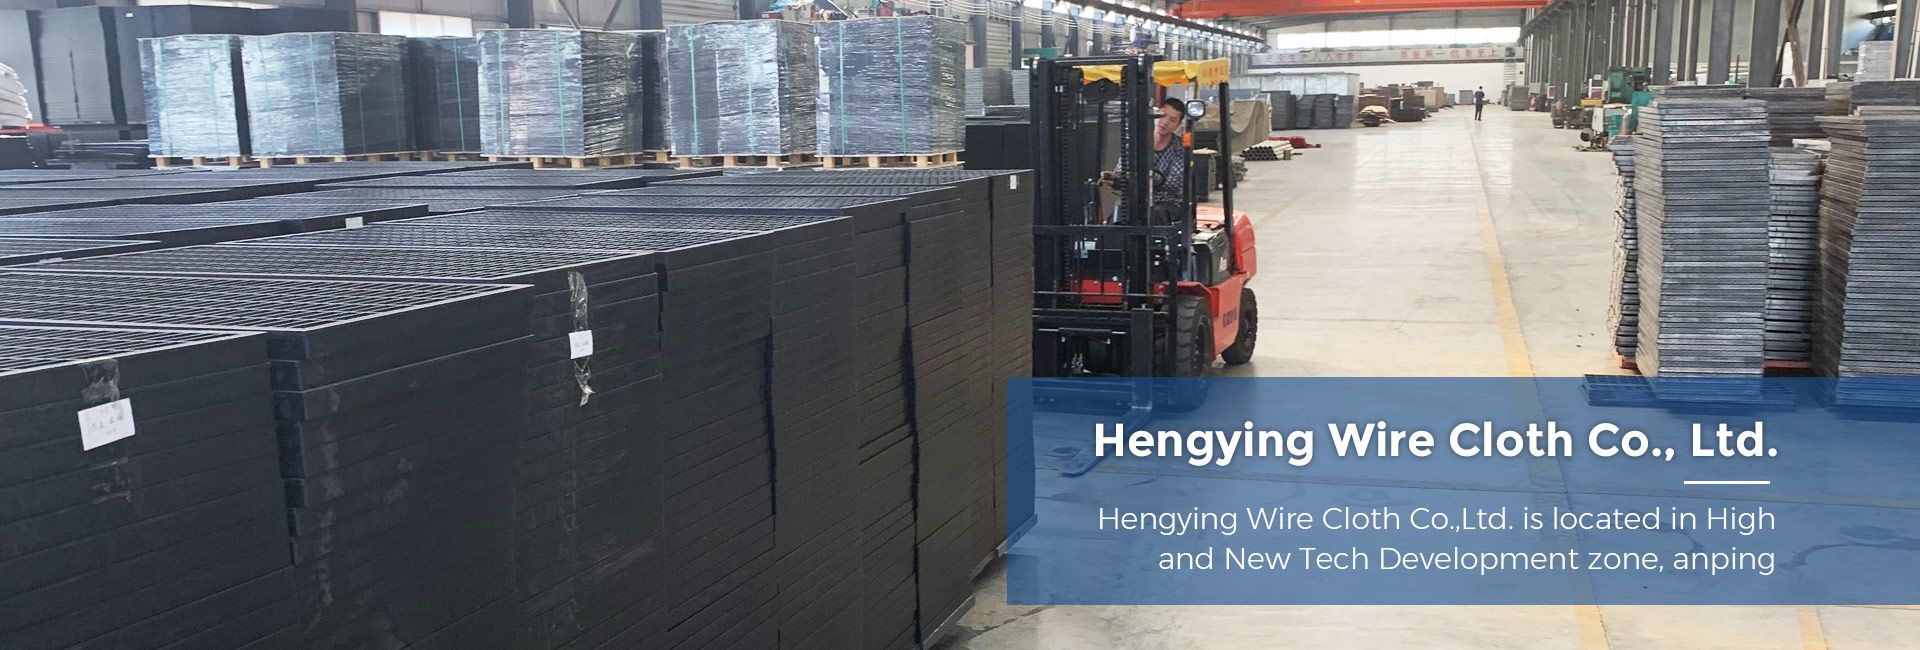 Hengying Wire Cloth Co.,Ltd.